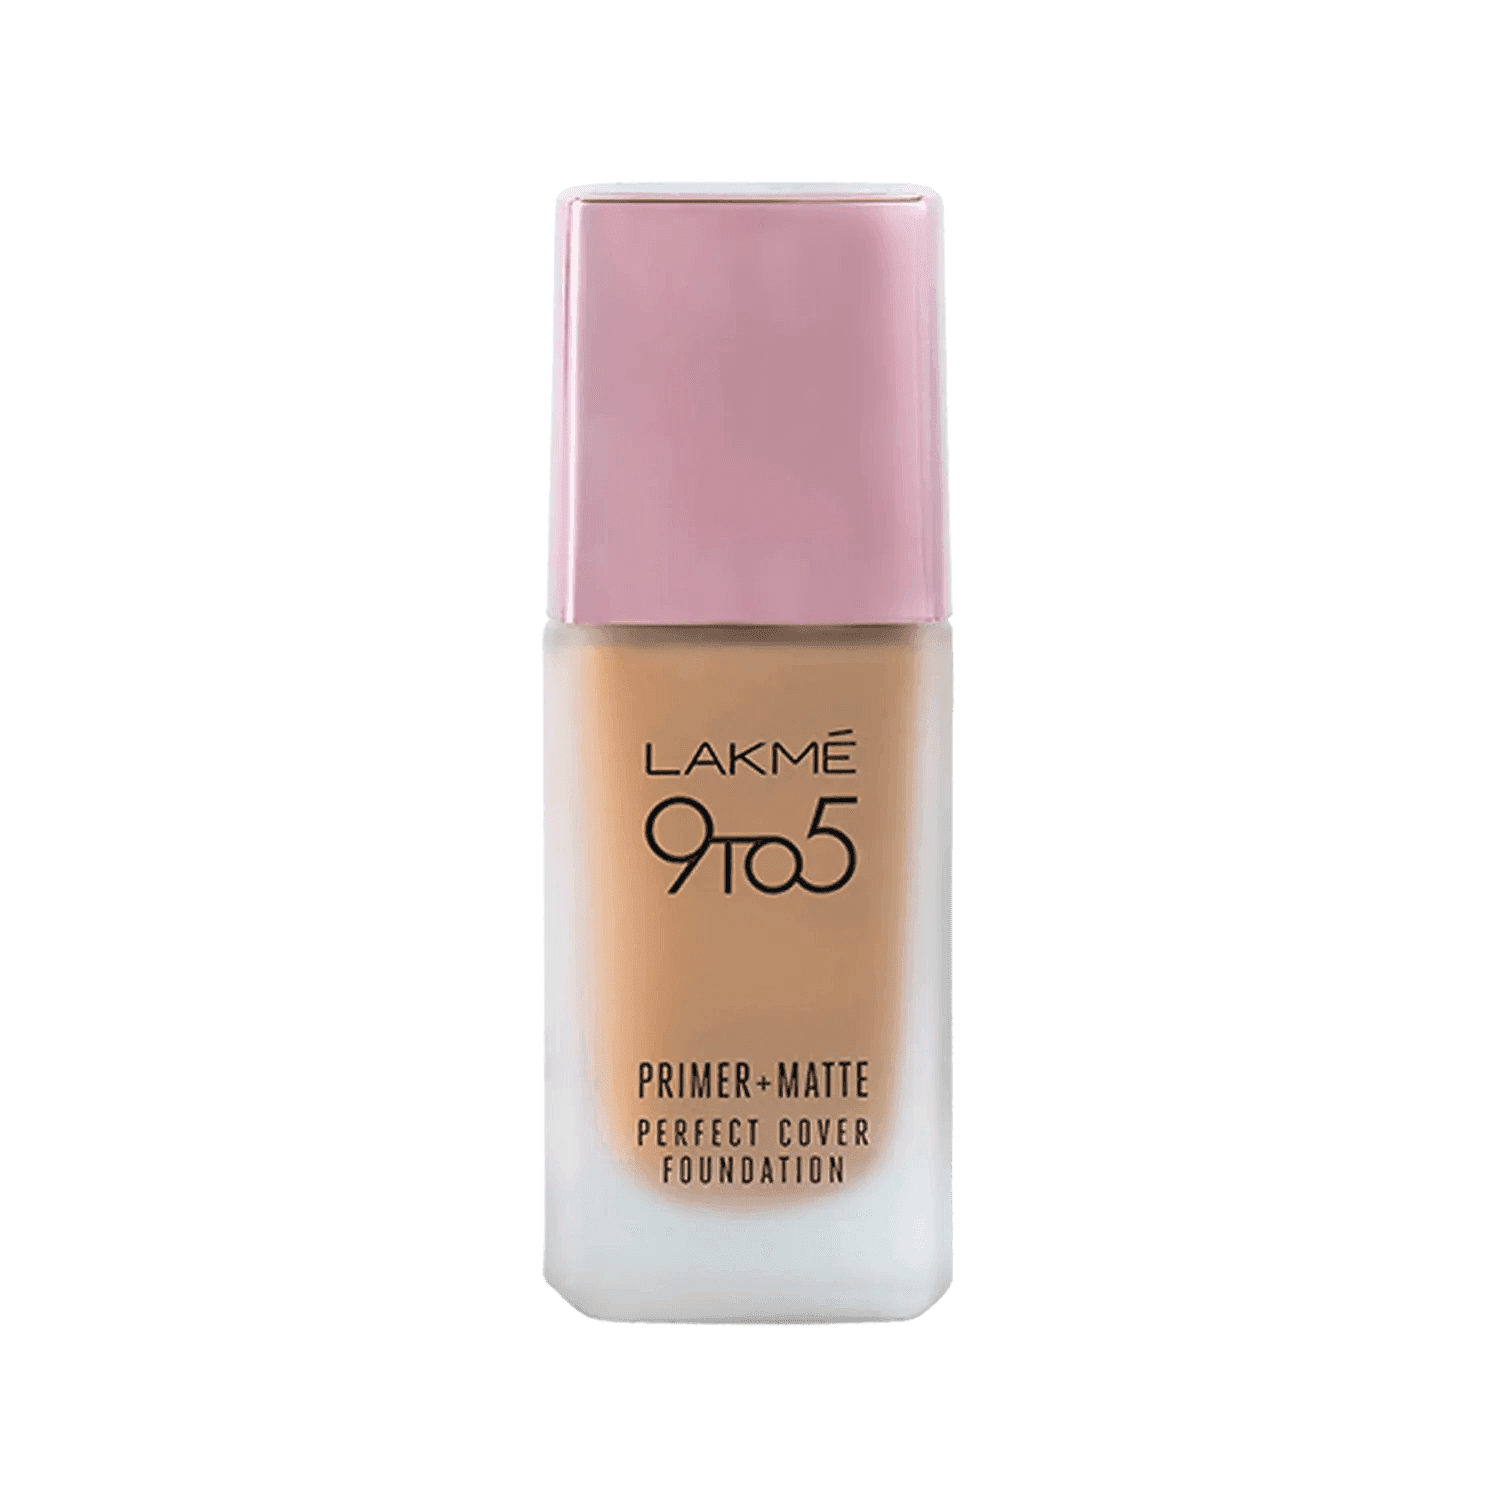 lakme 9 to 5 primer + matte perfect cover foundation - n260 neutral honey (25ml)